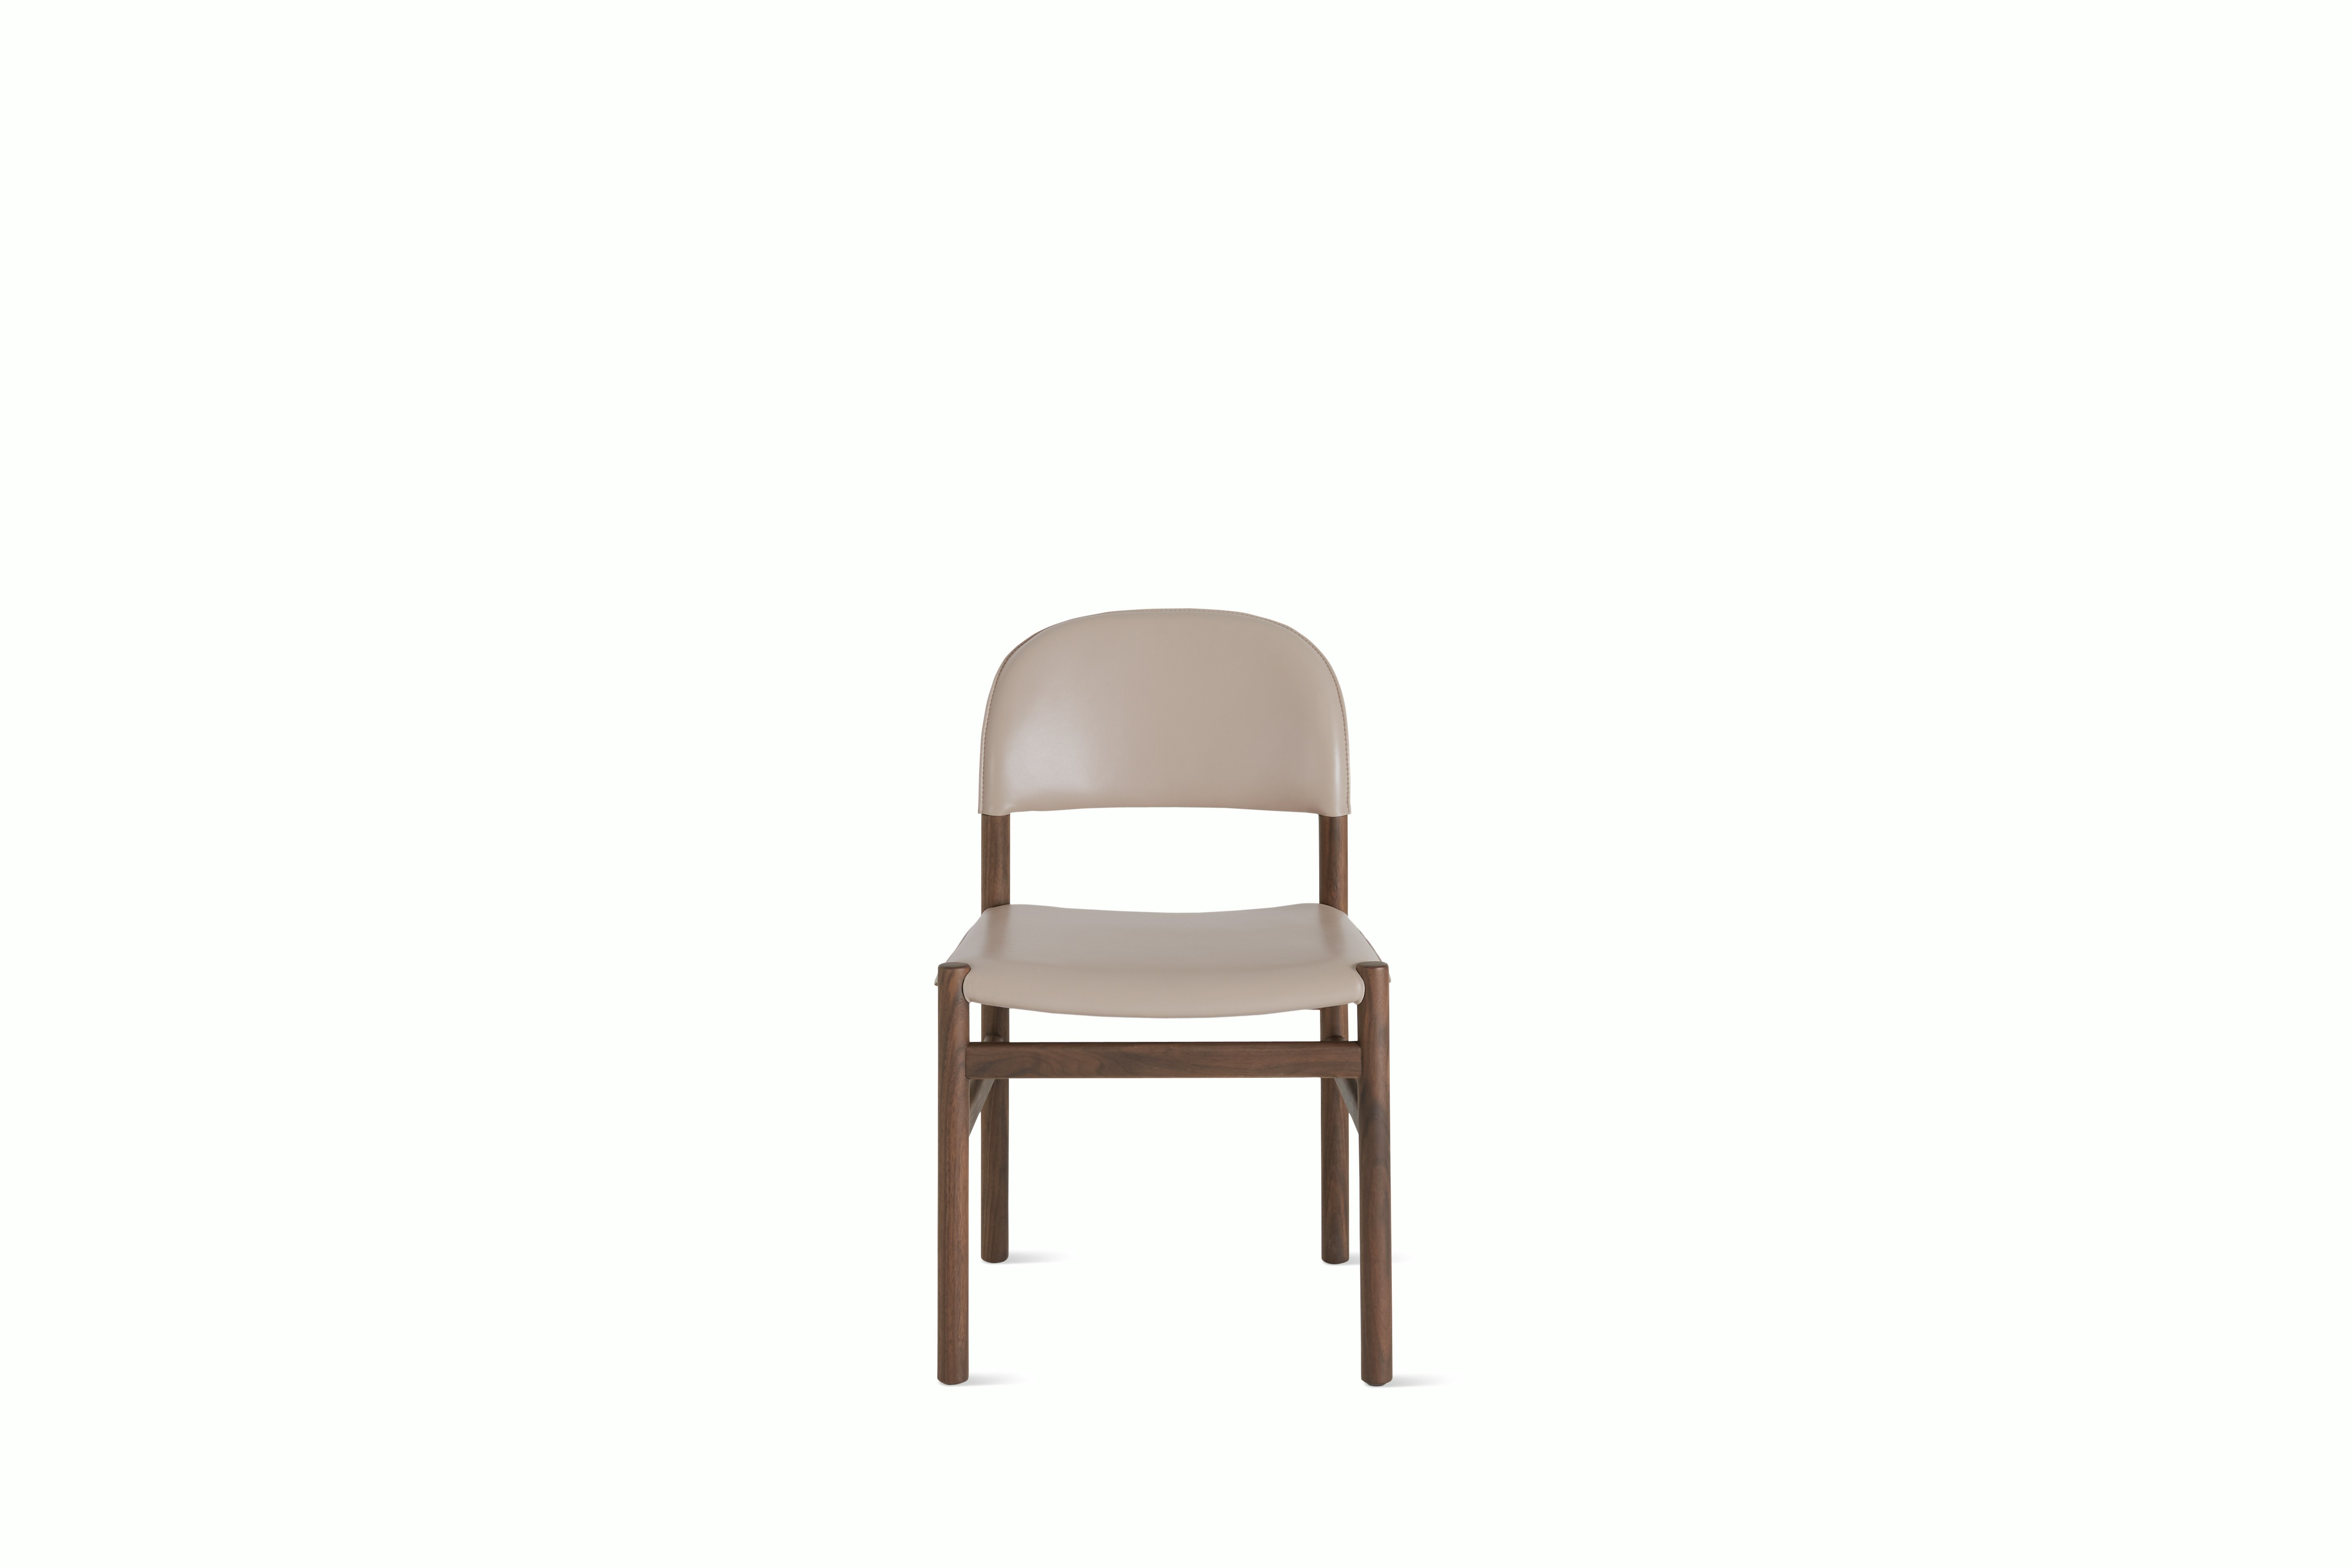 Details about   Authentic DWR Exclusive Note ChairDesign Within Reach